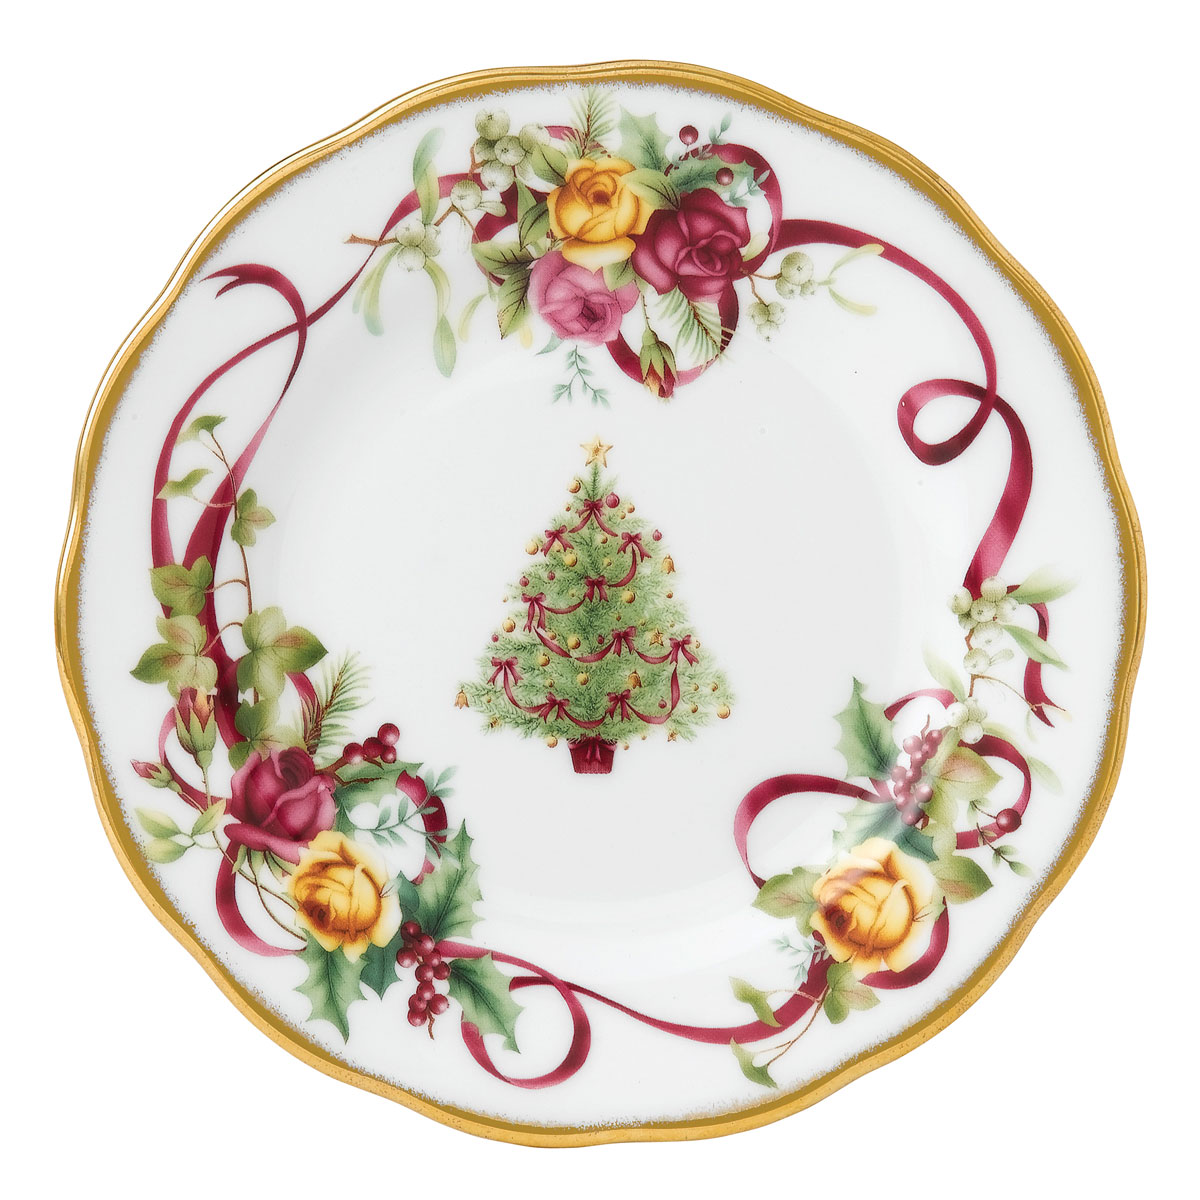 Royal Doulton Old Country Roses Bread and Butter Plate, Single